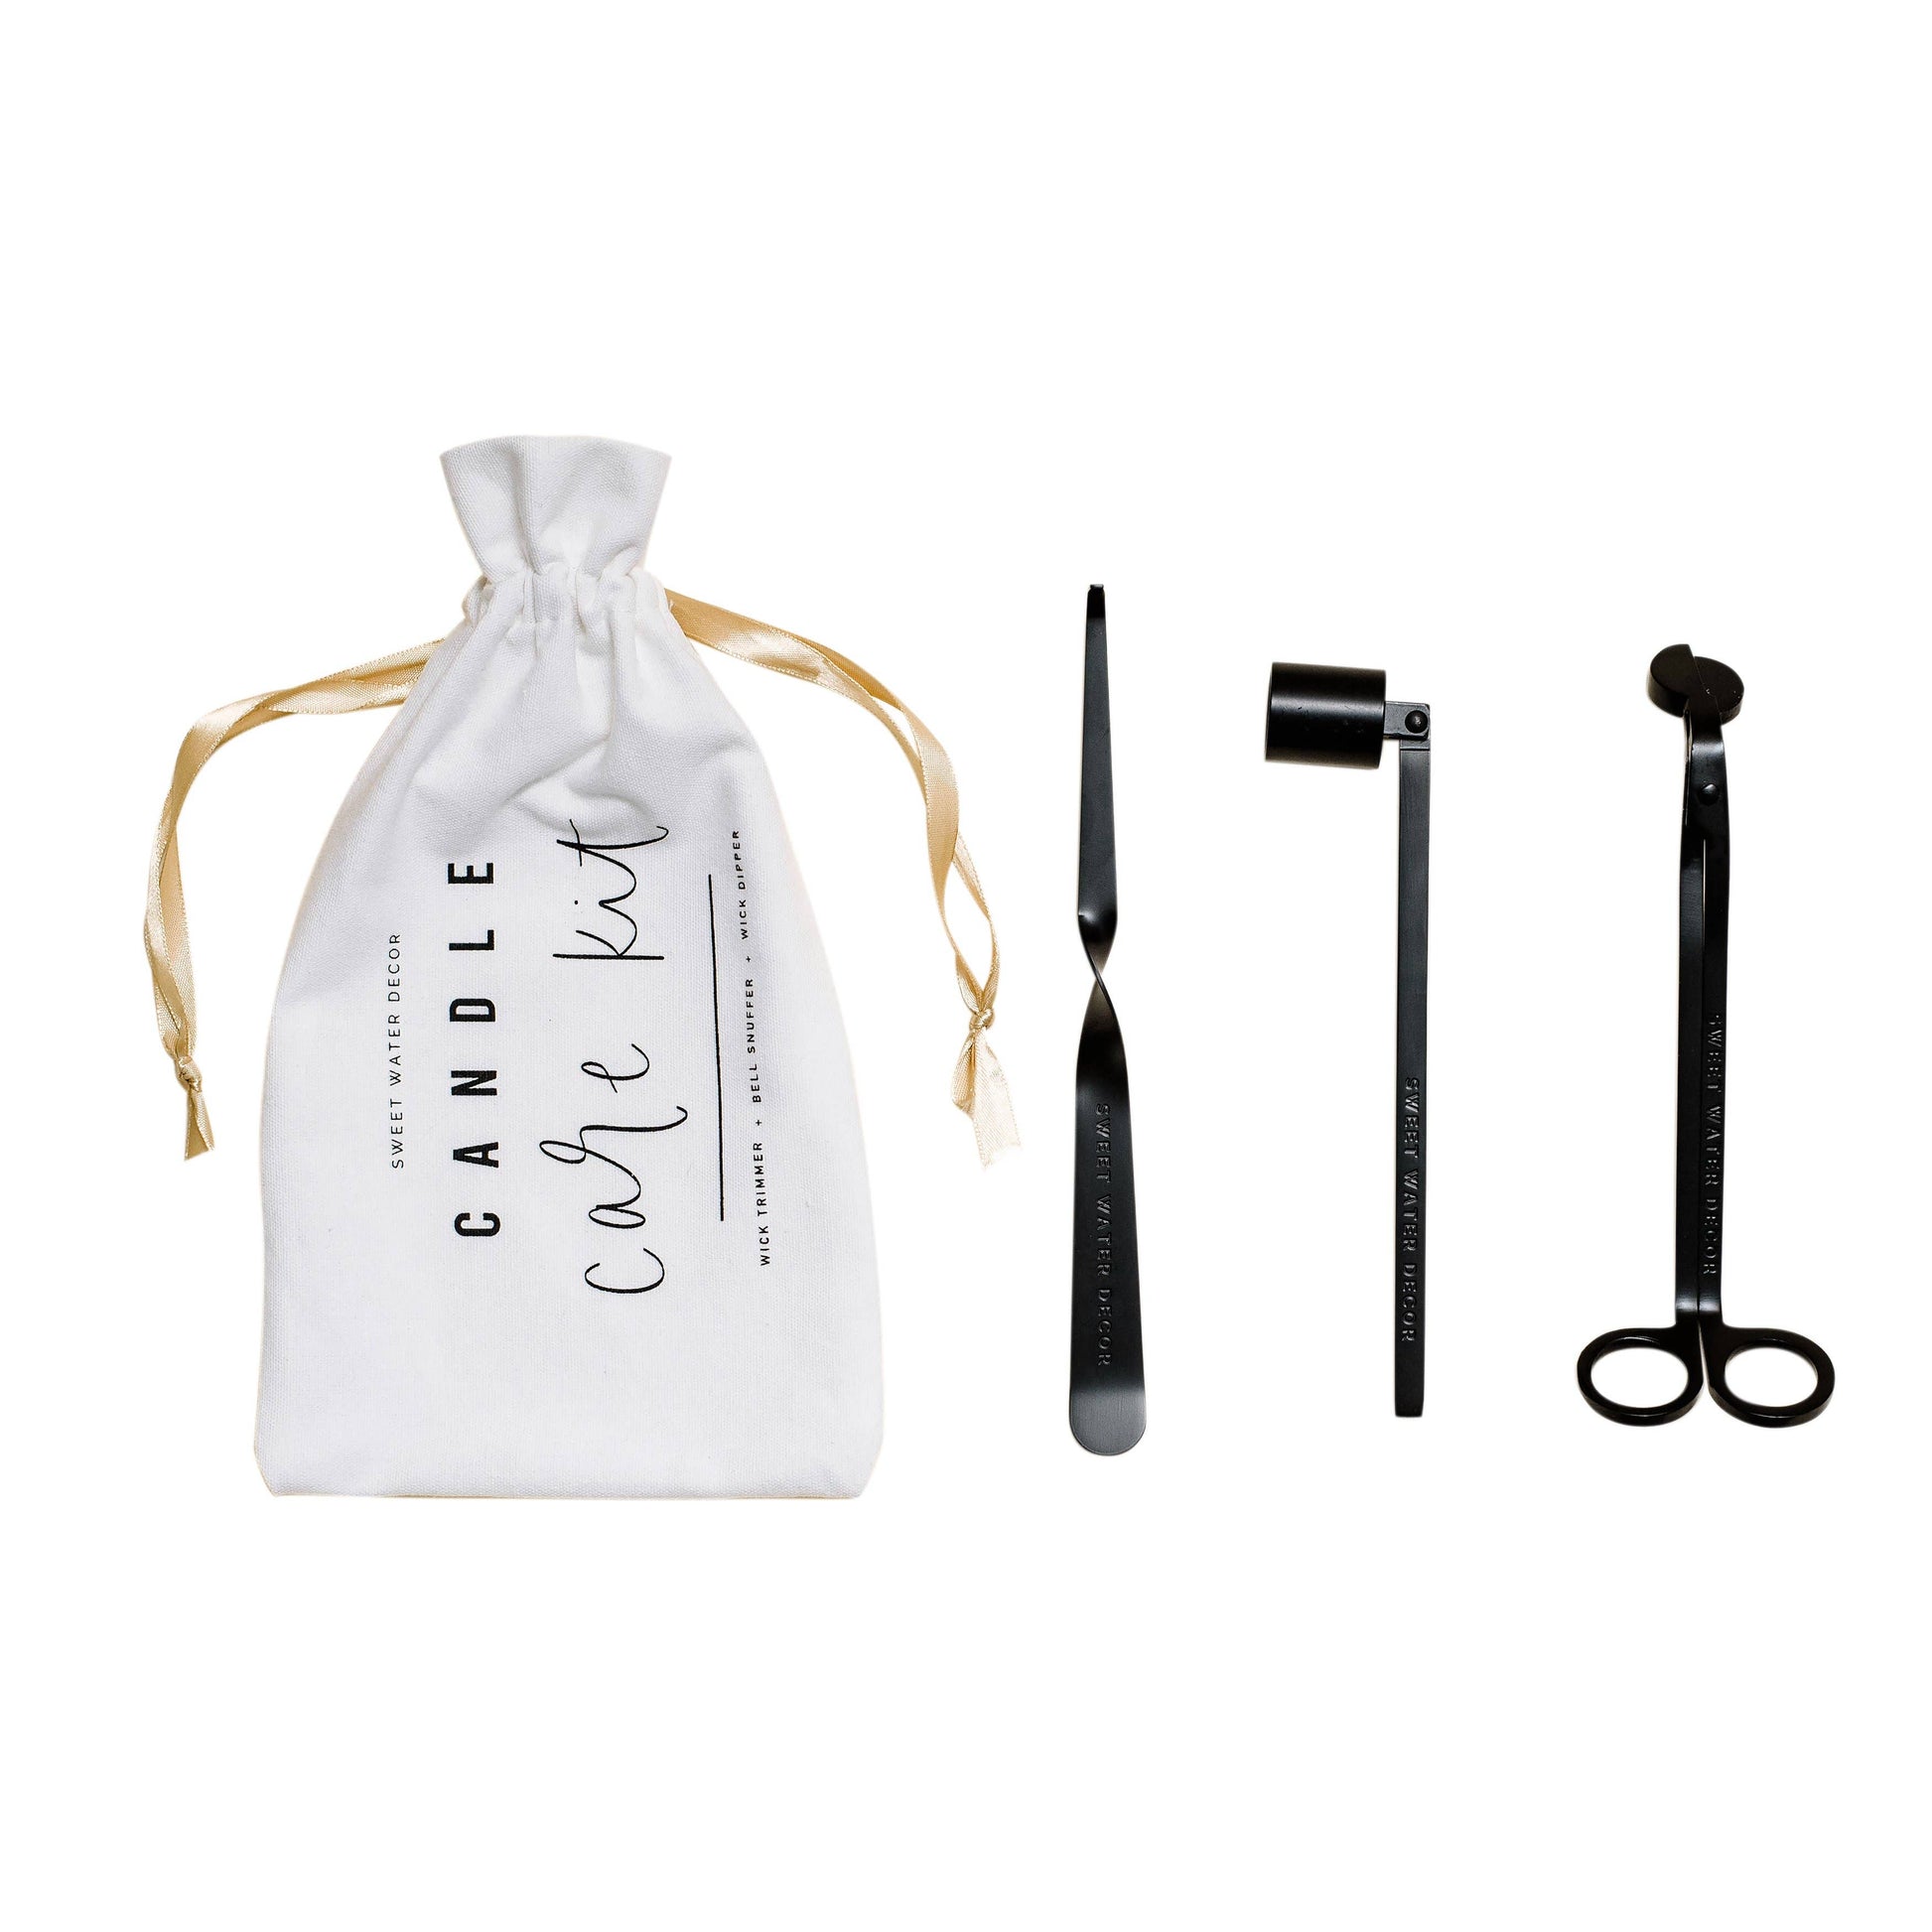 candle care set pictured with bag and all set contents.